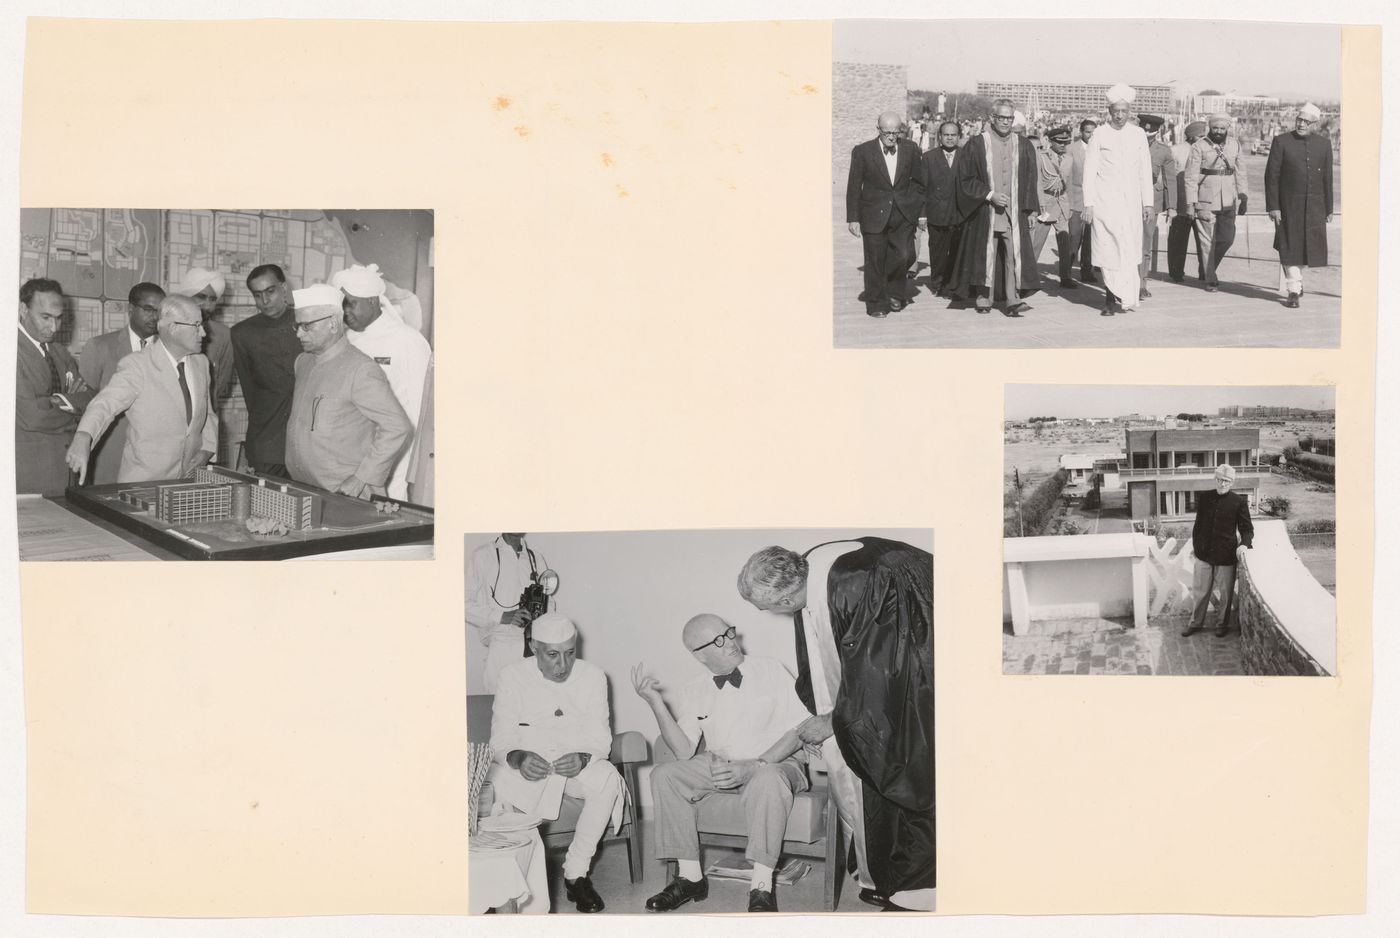 Portraits of Pierre Jeanneret and others at various events in Chandigarh, India